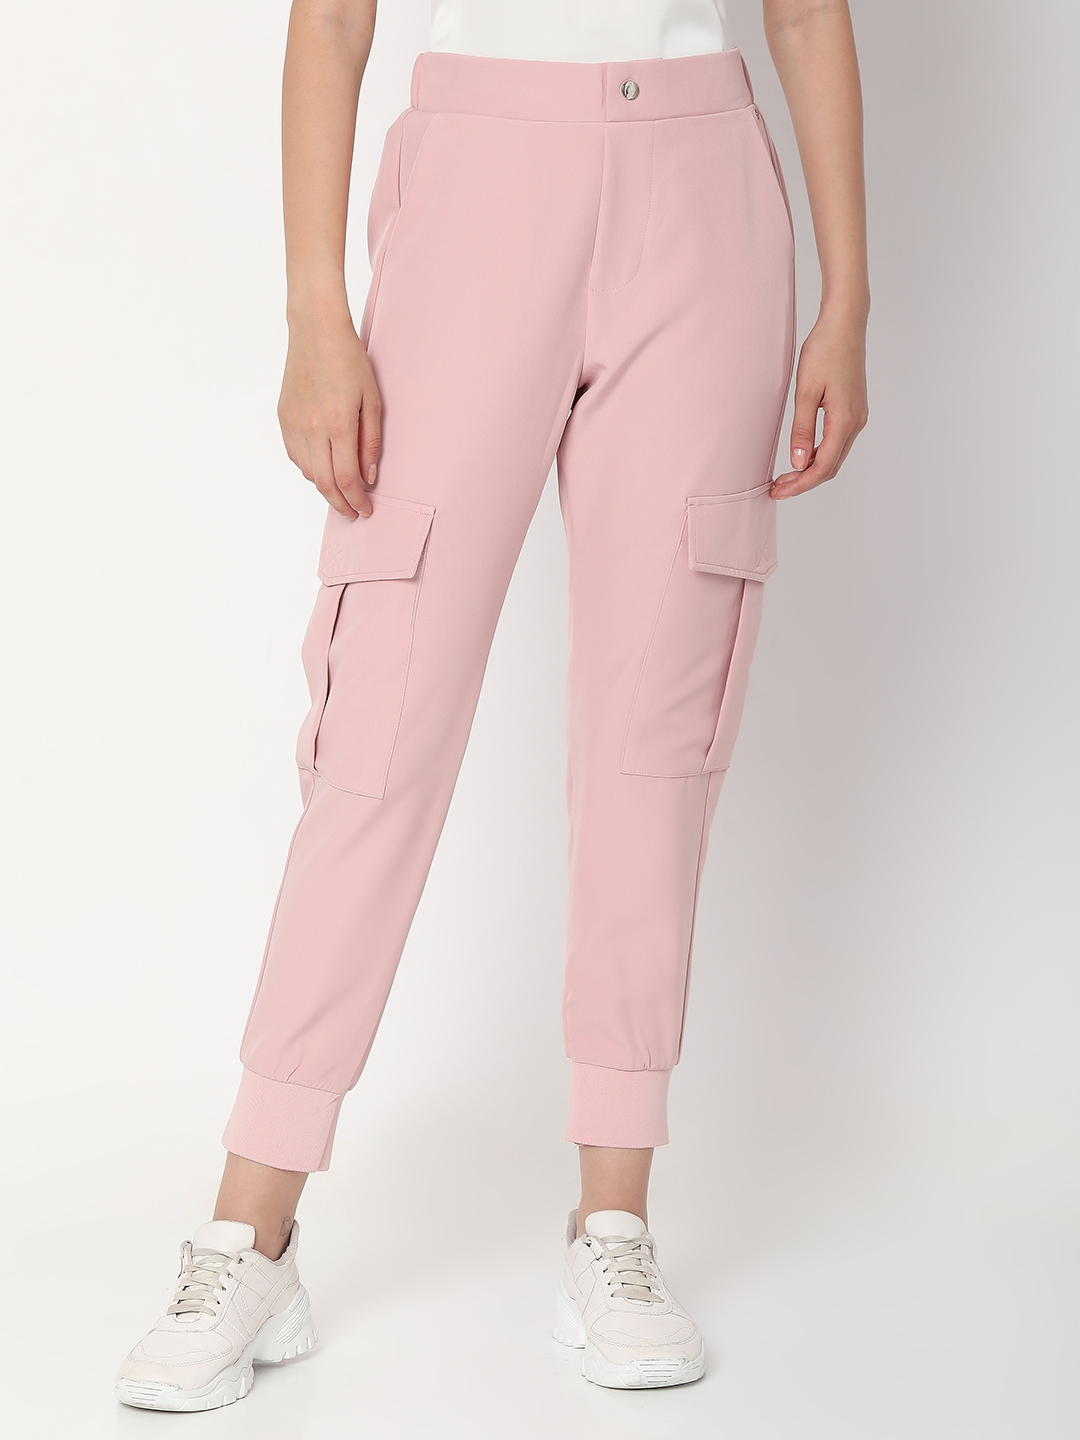 spykar | Women's Pink Cotton Solid Trackpants 0